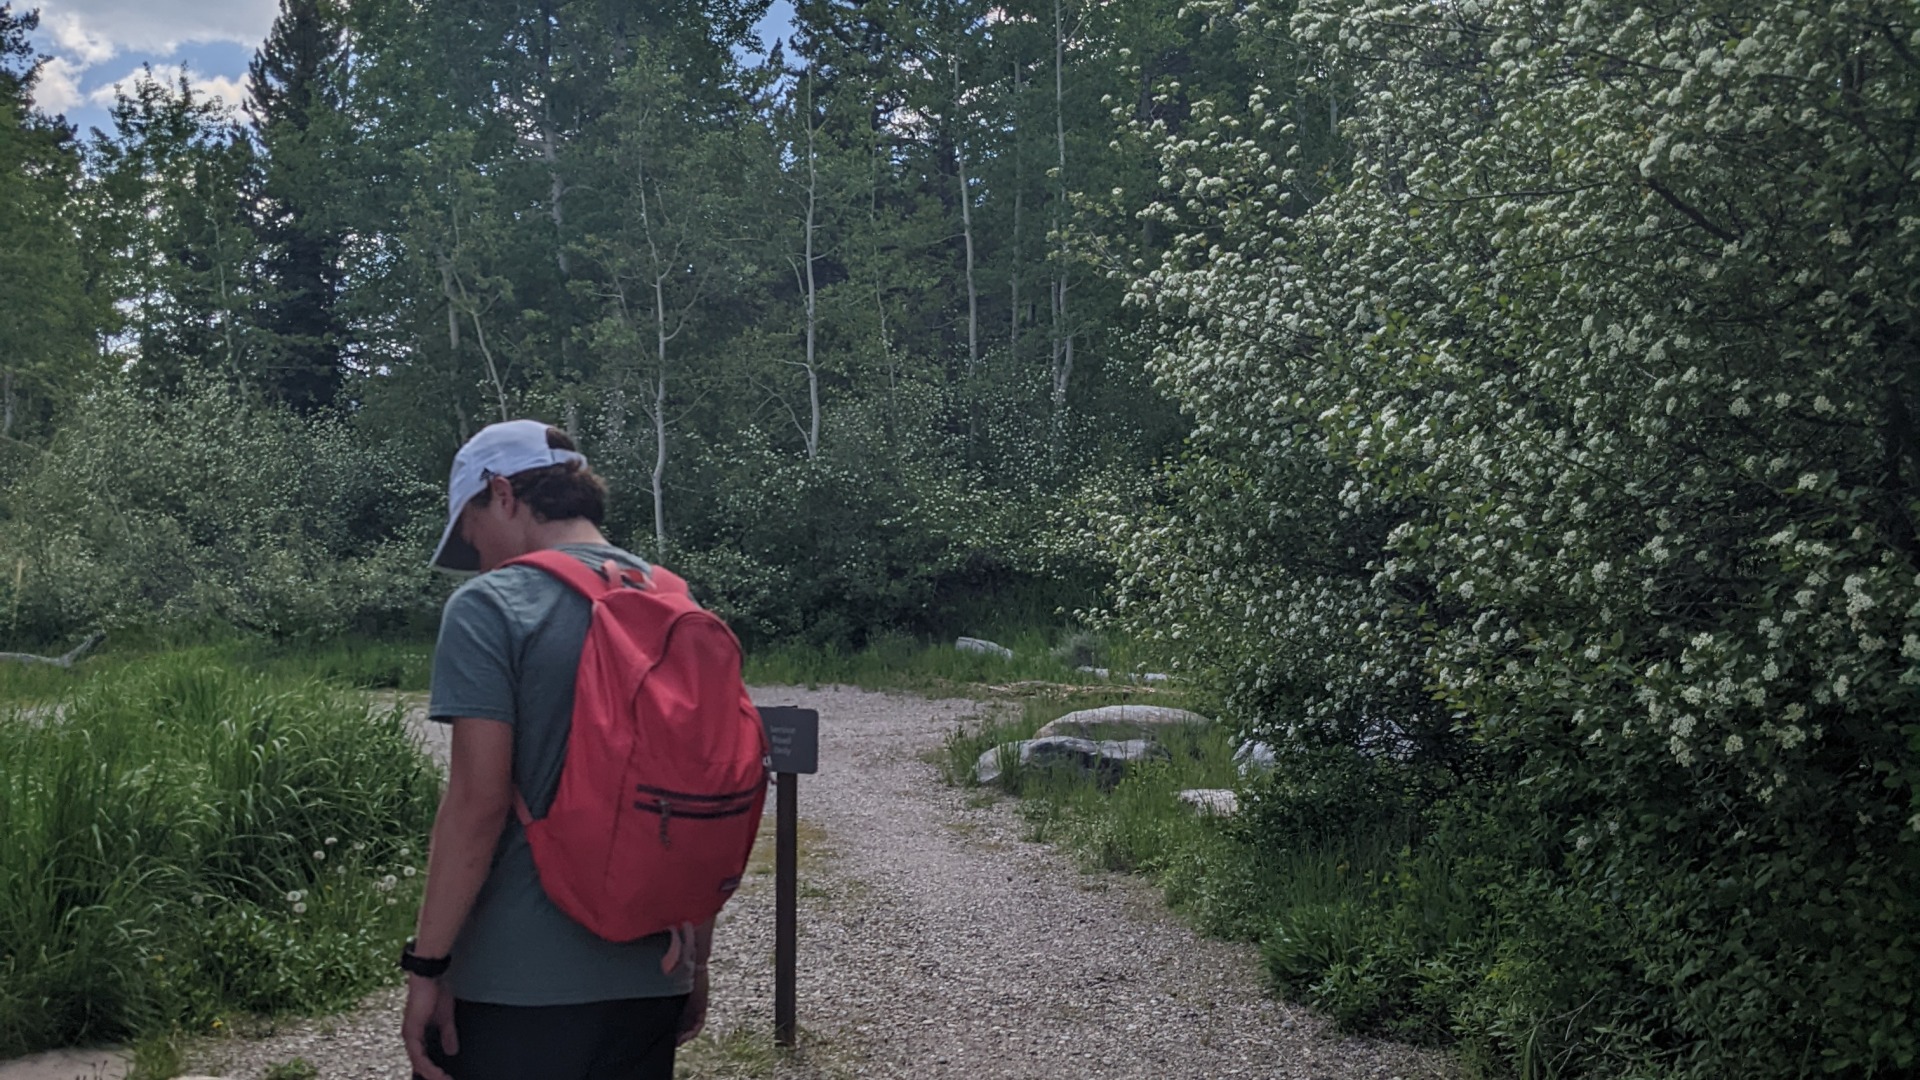 Me with red backpack, going down a wide trail path with evergreen trees in the background